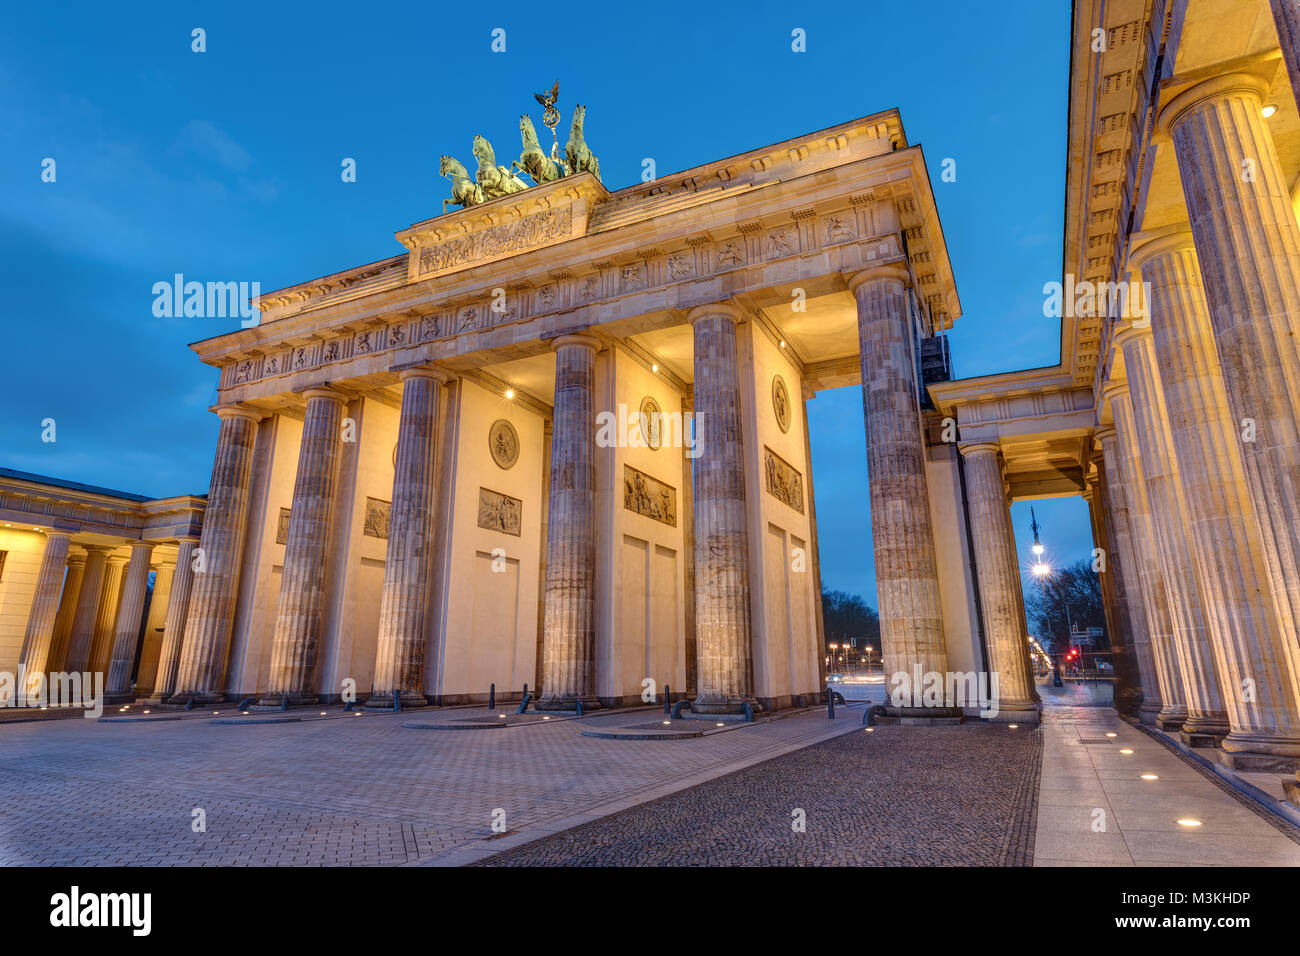 The famous Brandenburger Tor in Berlin at dawn Stock Photo